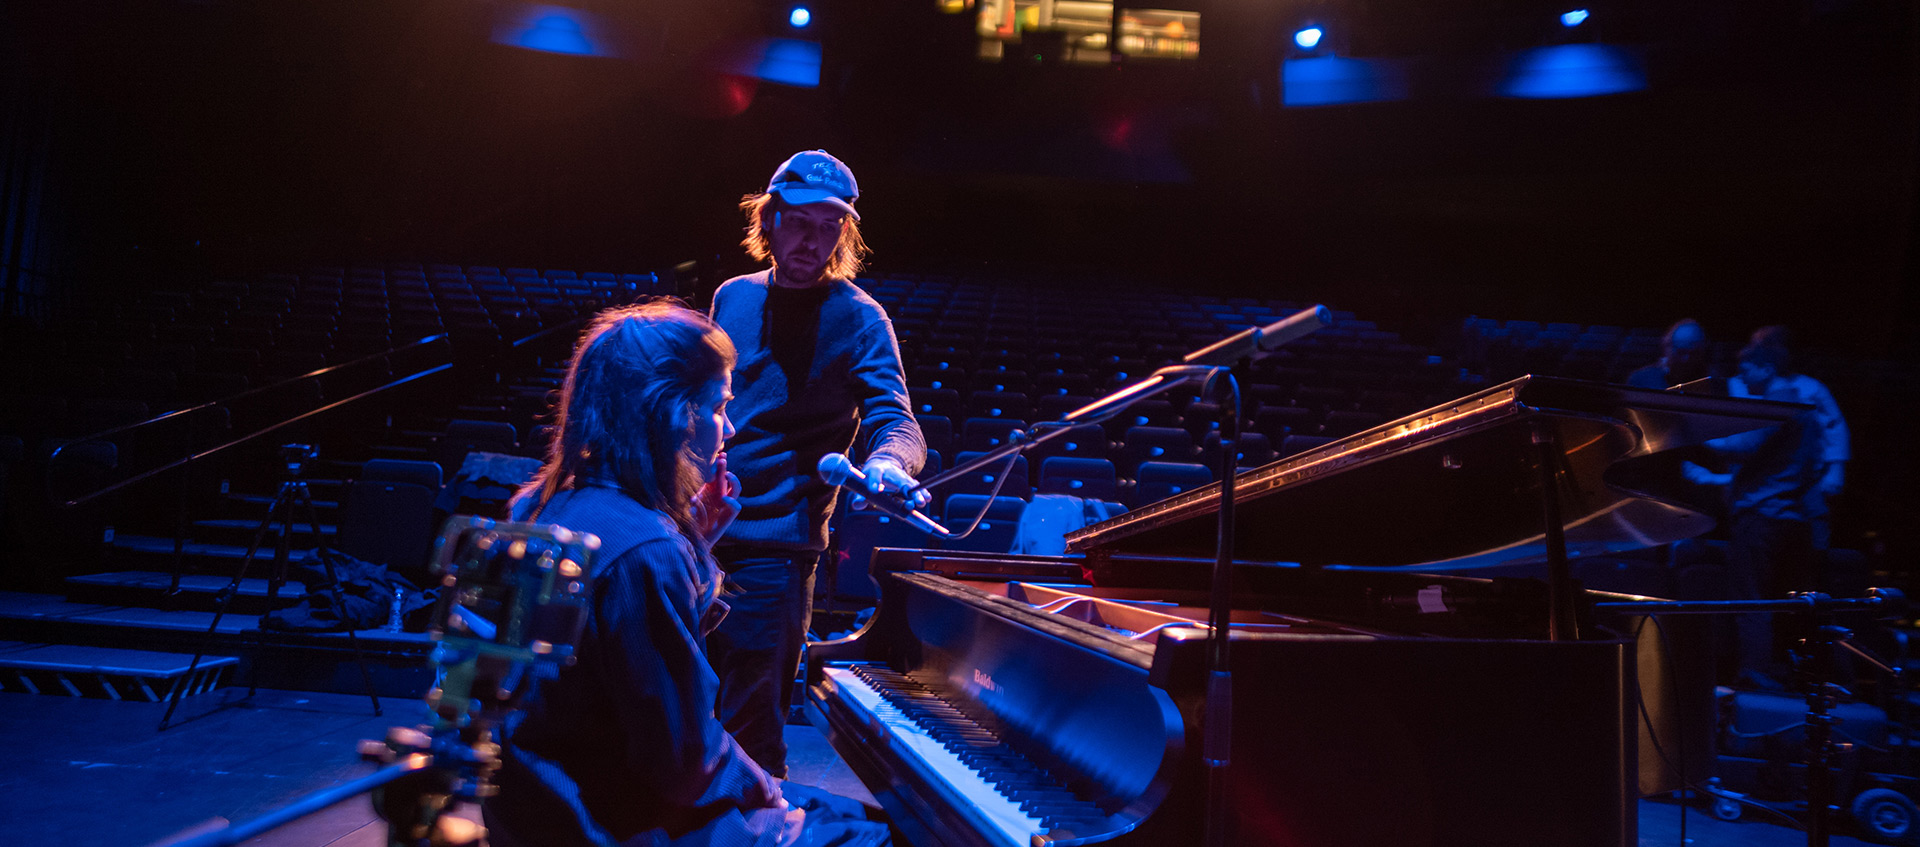 Erin Durant sits at a piano on stage as a crew person places a mic in front of her